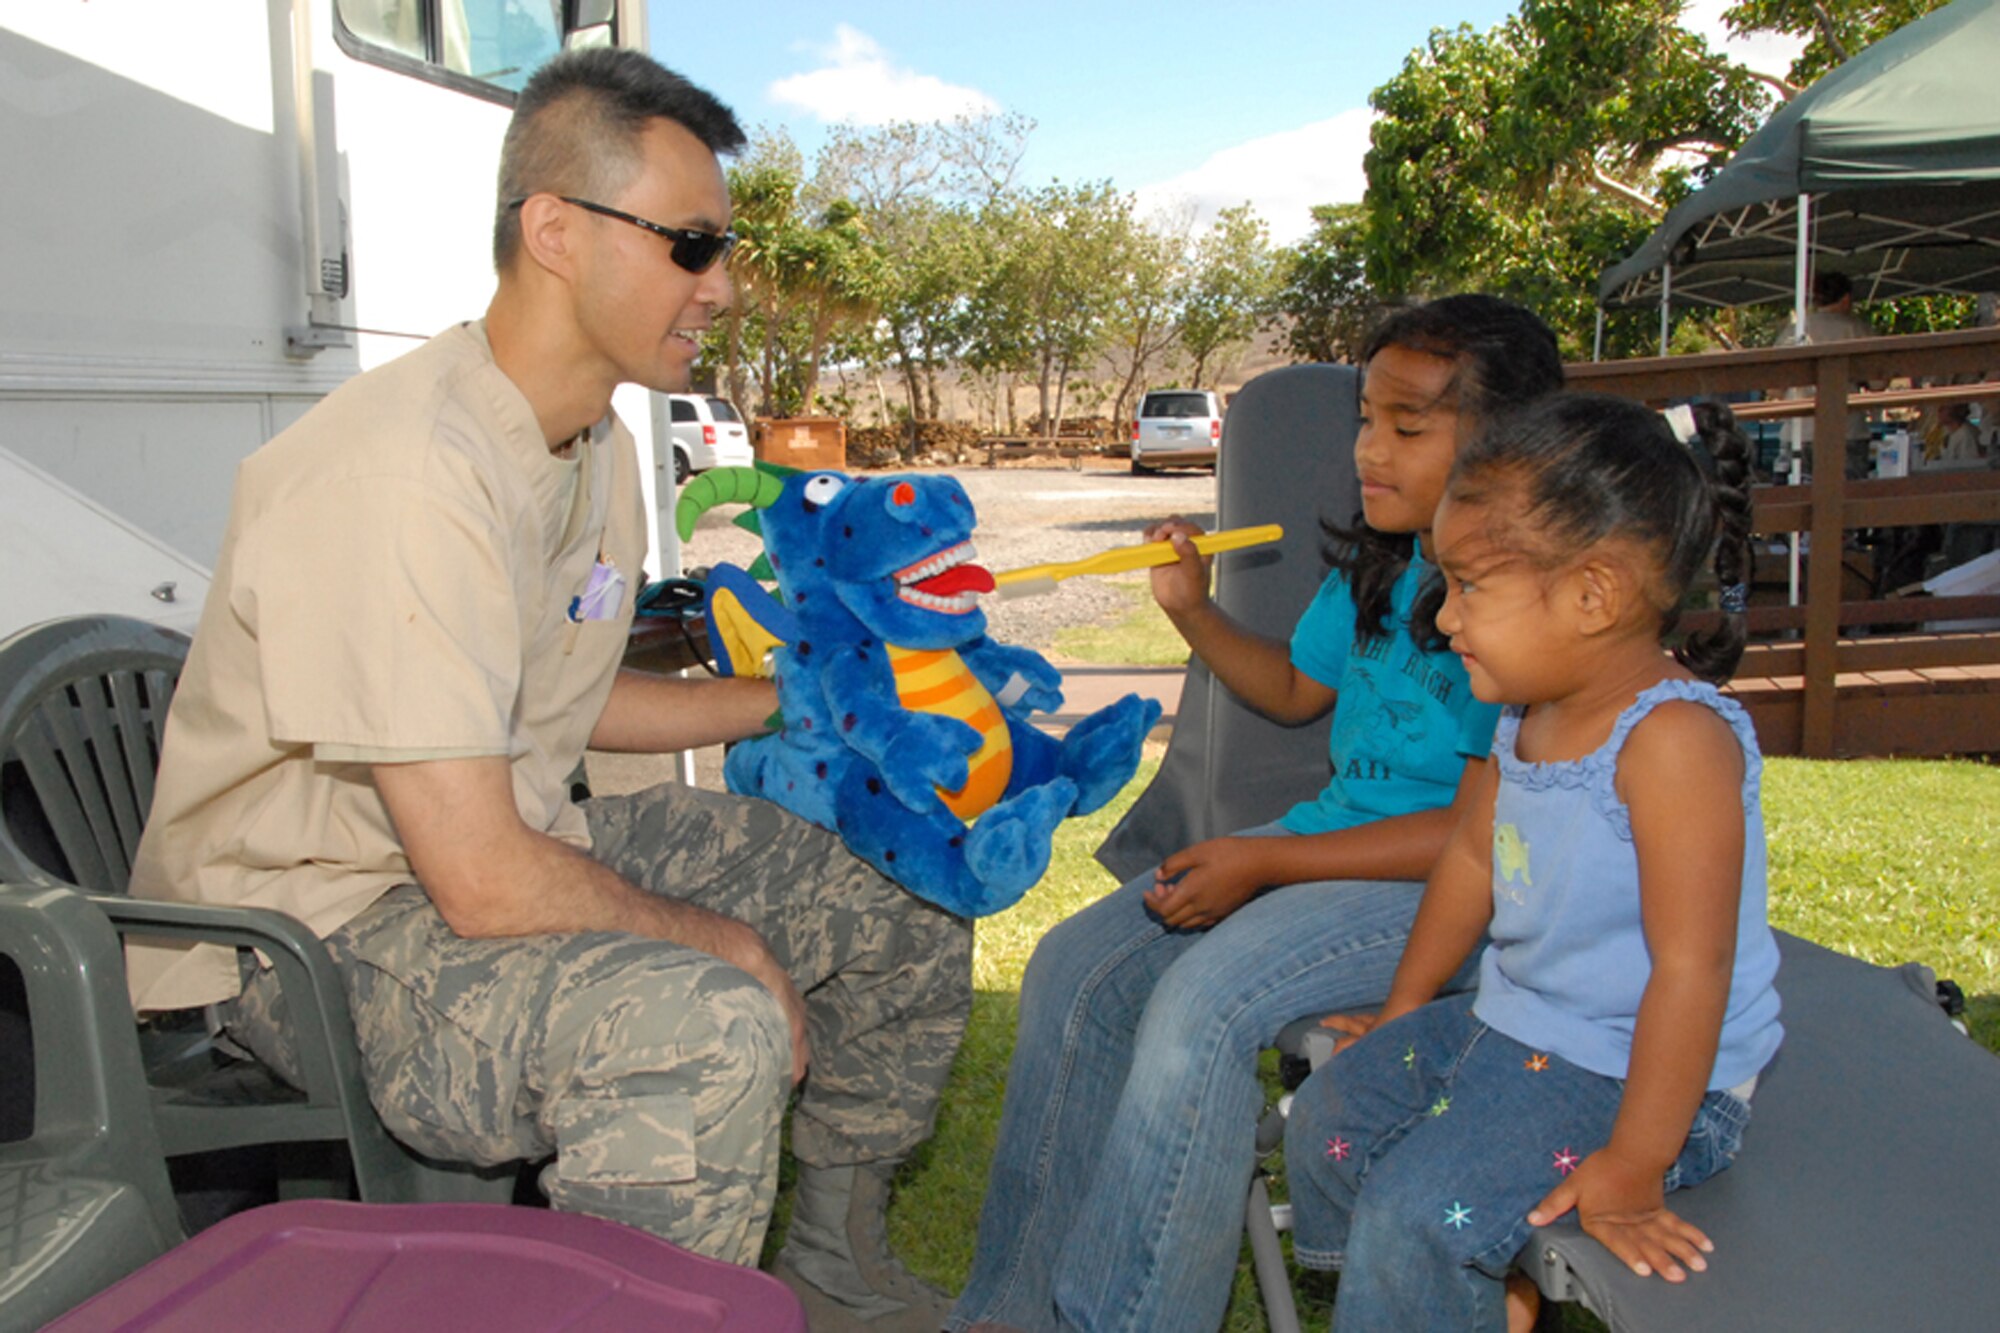 Maj. Simon Nguyen, a dentist with the 178th Medical Group, Ohio Air National Guard, uses an instructional puppet to teach young patients how to maintain good dental hygiene June 8 at Pu’ukohola Heiau National Historic Site, Kona, Hawaii.  The 178 MDG is on a training deployment in which it provides free medical services to underserved communities that do not have access to healthcare on the island.